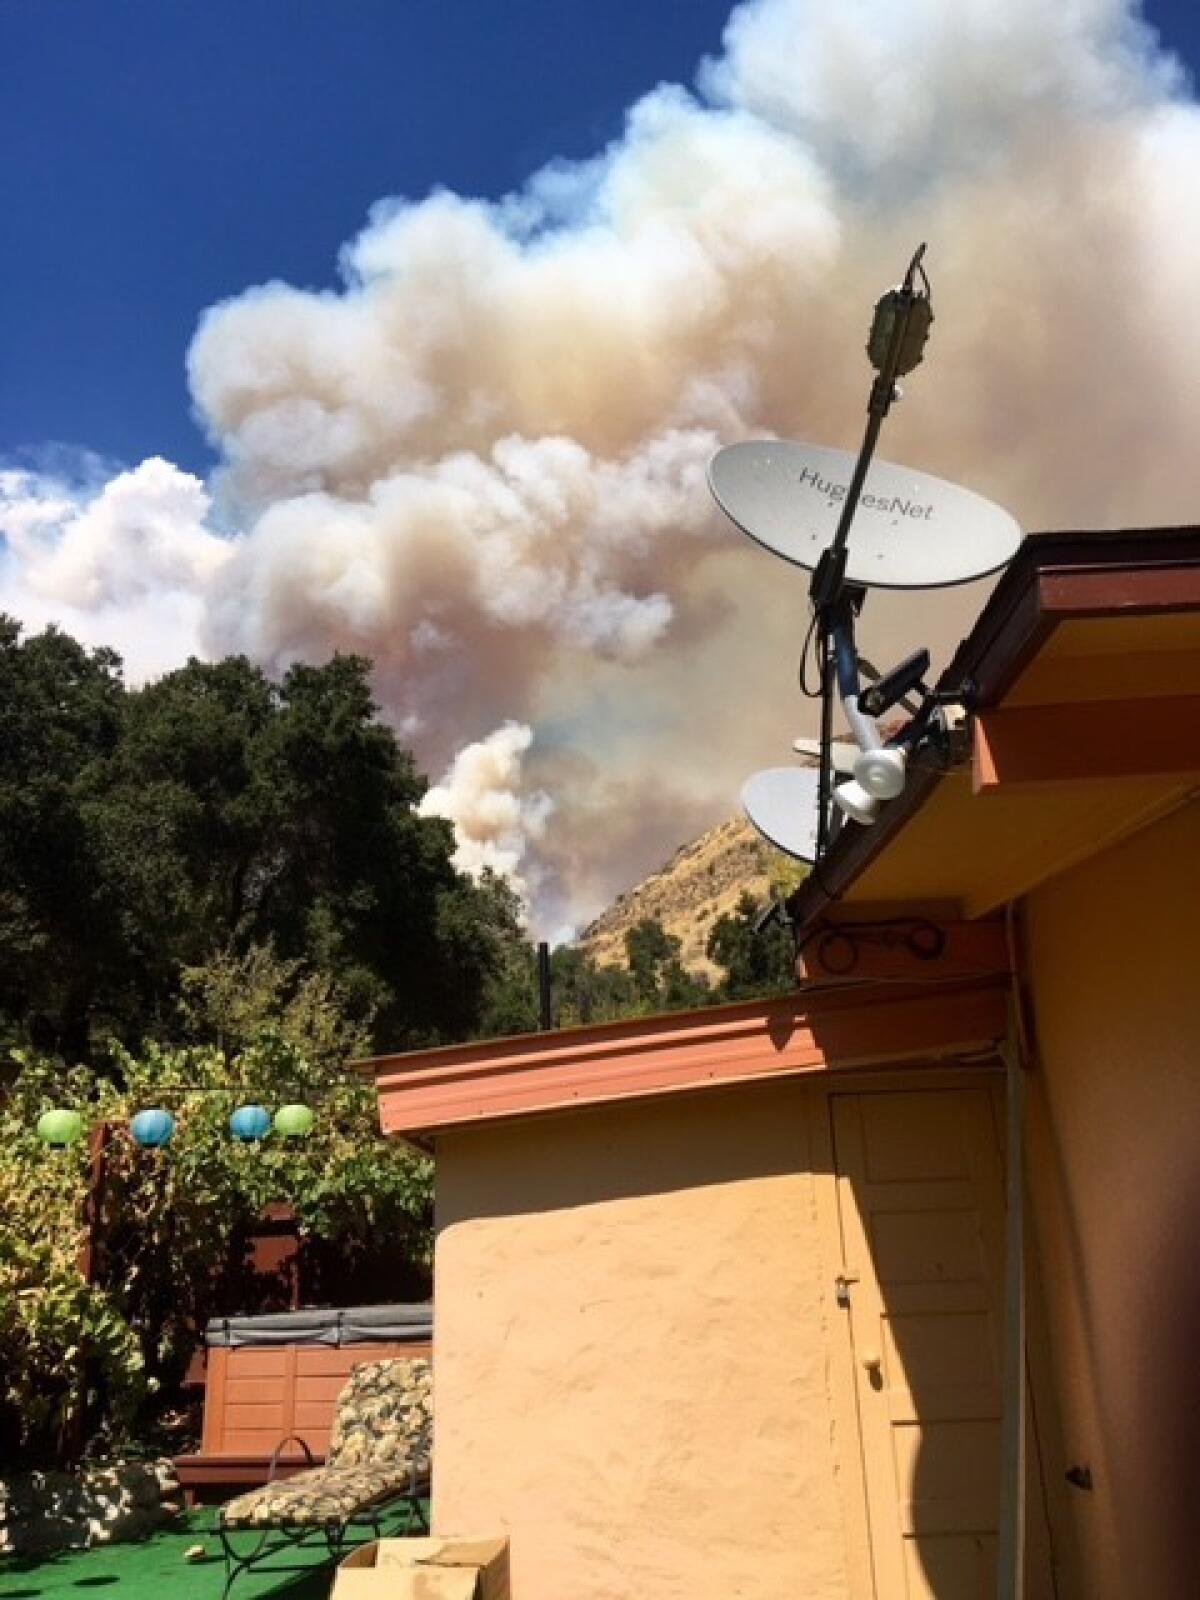 Smoke billows over the Arroyo Seco home of Vanessa and Kit Radley, who live in a valley that was once in the path of the long-burning Soberanes fire in Monterey County. (Vanessa and Kit Radley)